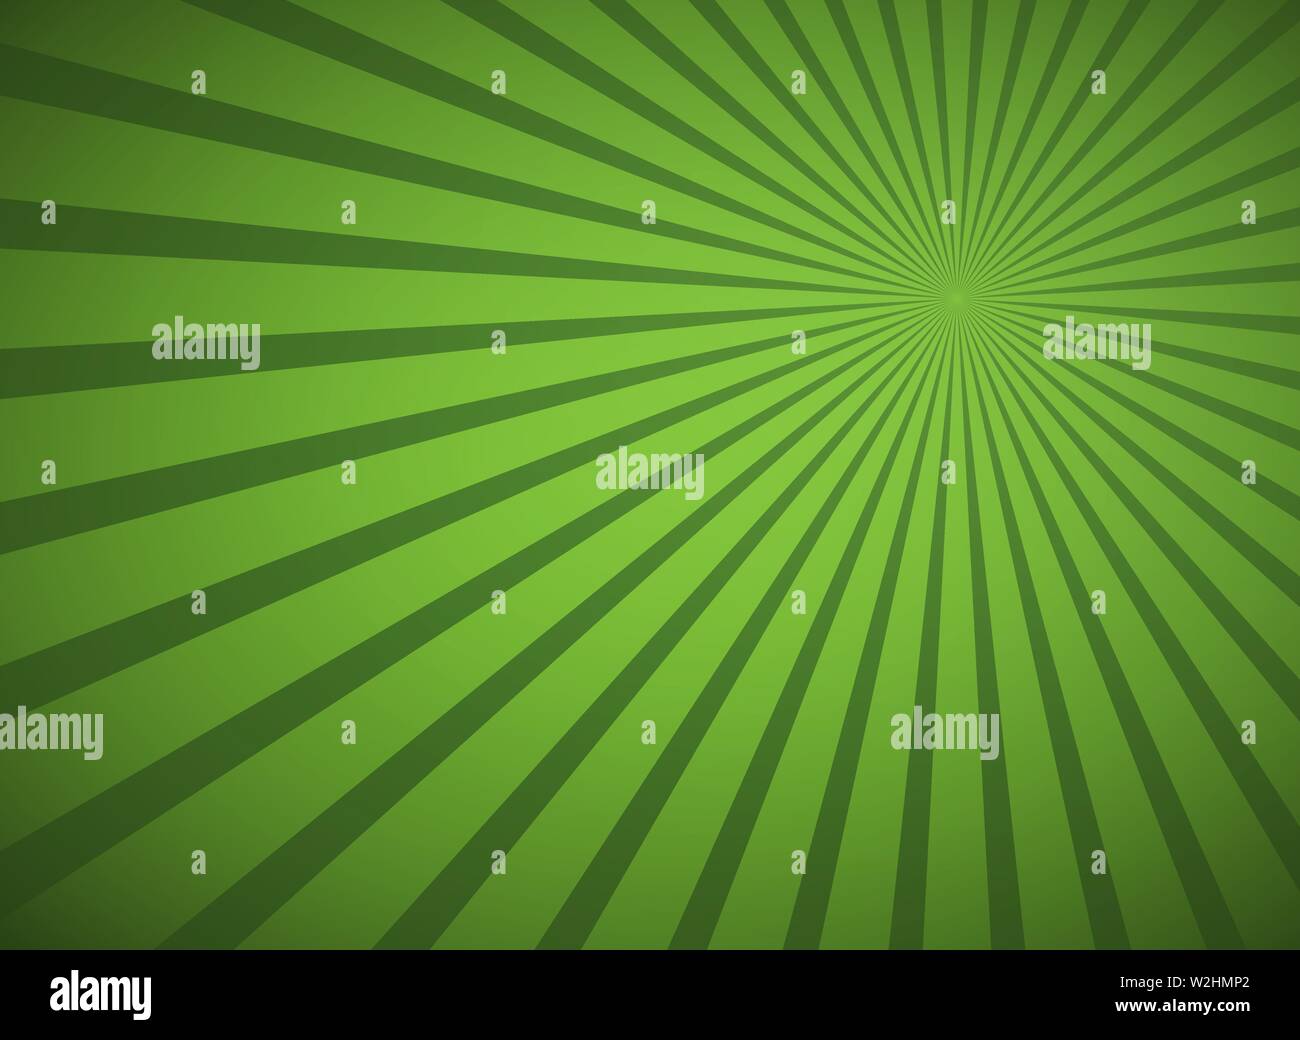 Green abstract vector illustration background with radial line rays Stock Vector